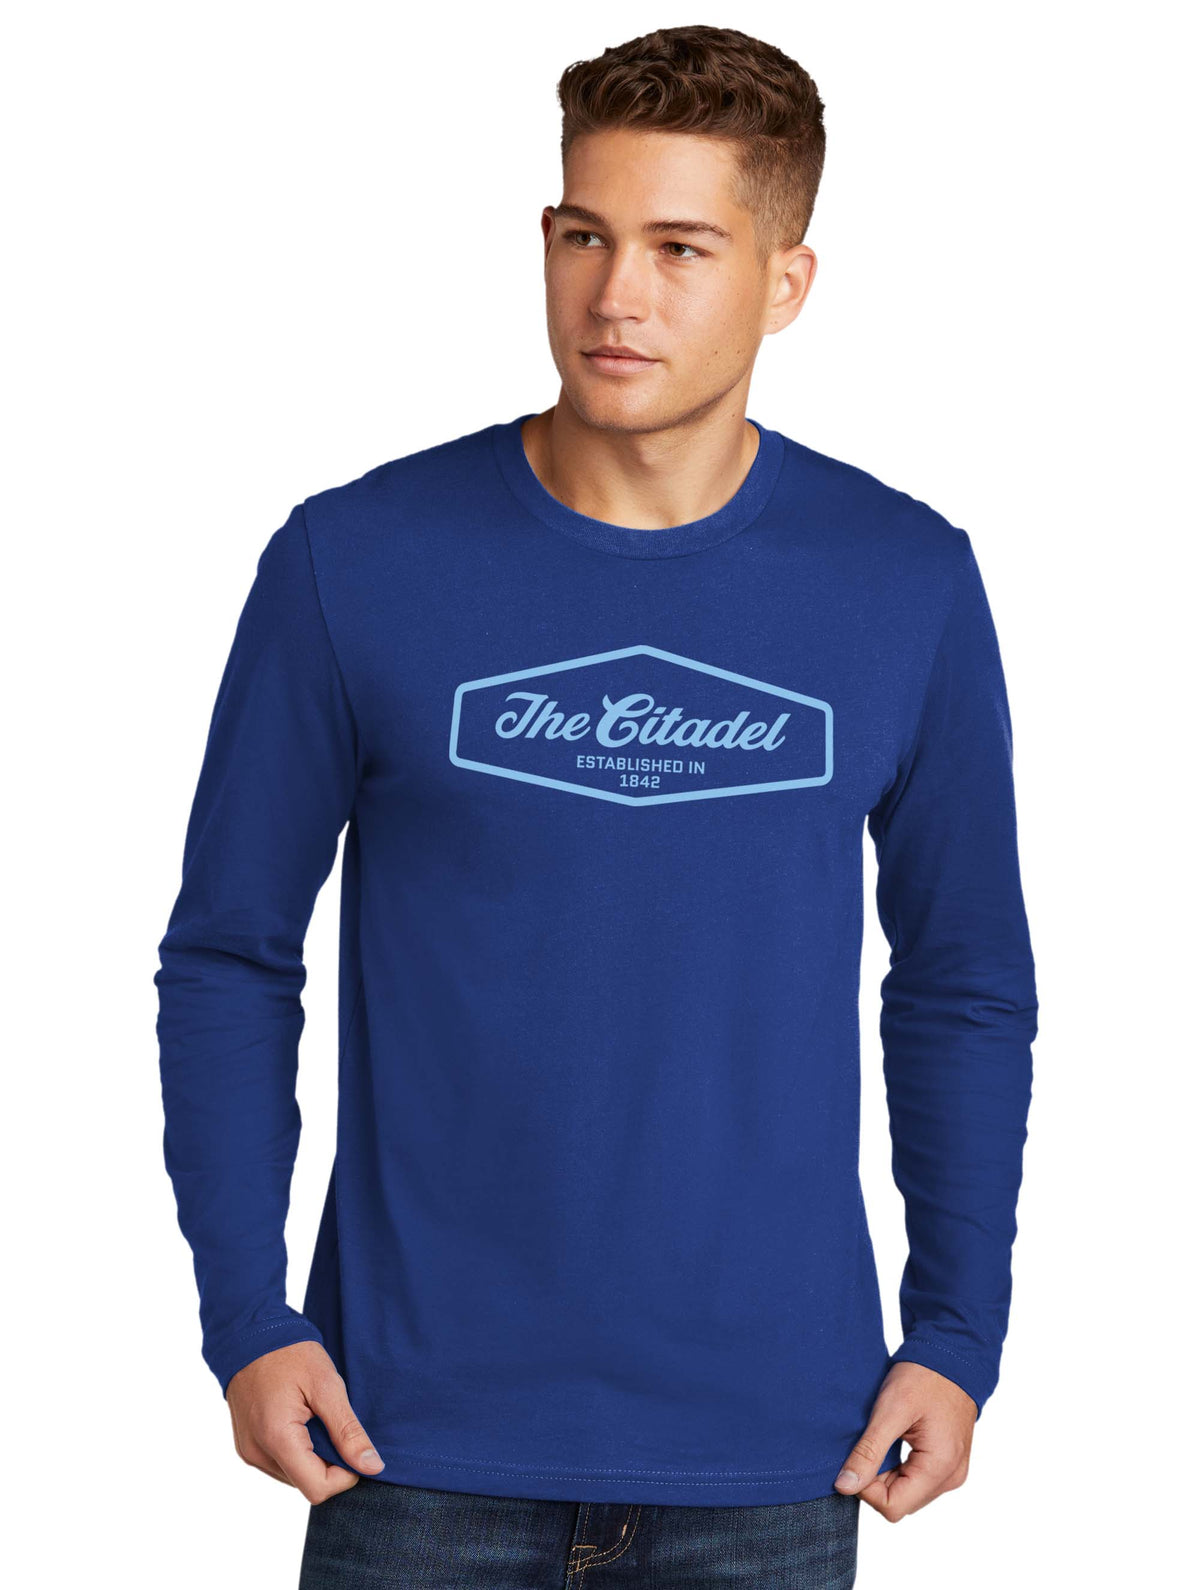 The Citadel ESTABLISHED IN 1842 Cotton Long Sleeve Tee